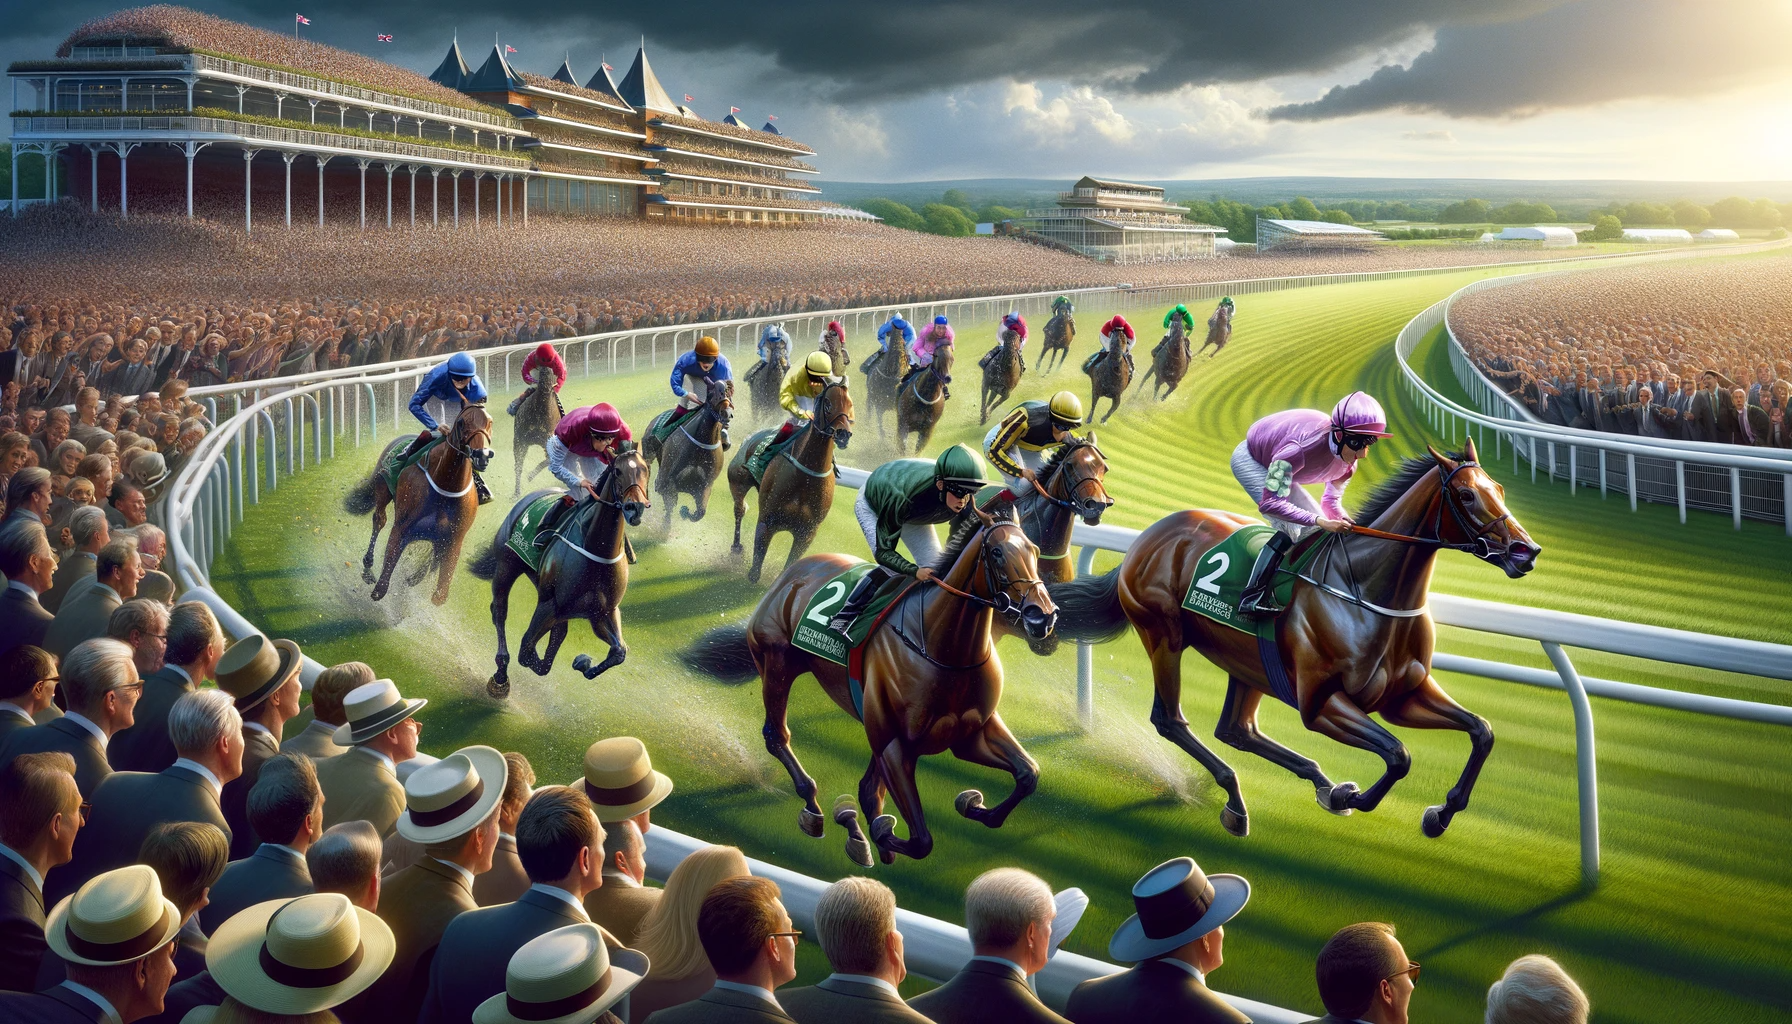 The Epsom Derby: A Chronicle of Excellence, Tradition, and Impact